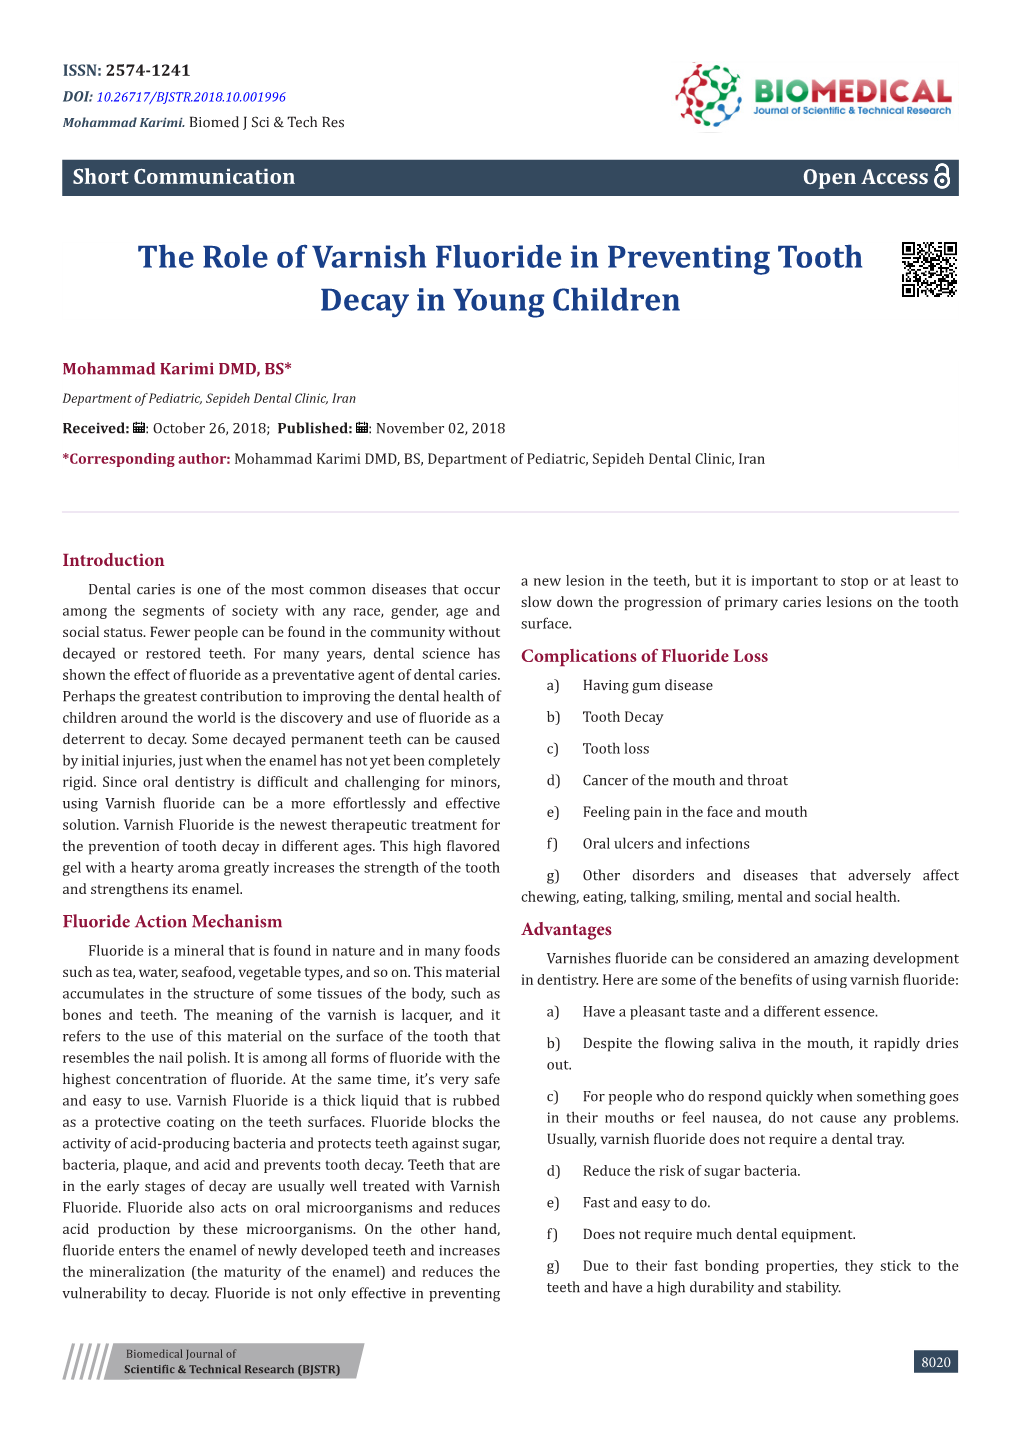 The Role of Varnish Fluoride in Preventing Tooth Decay in Young Children